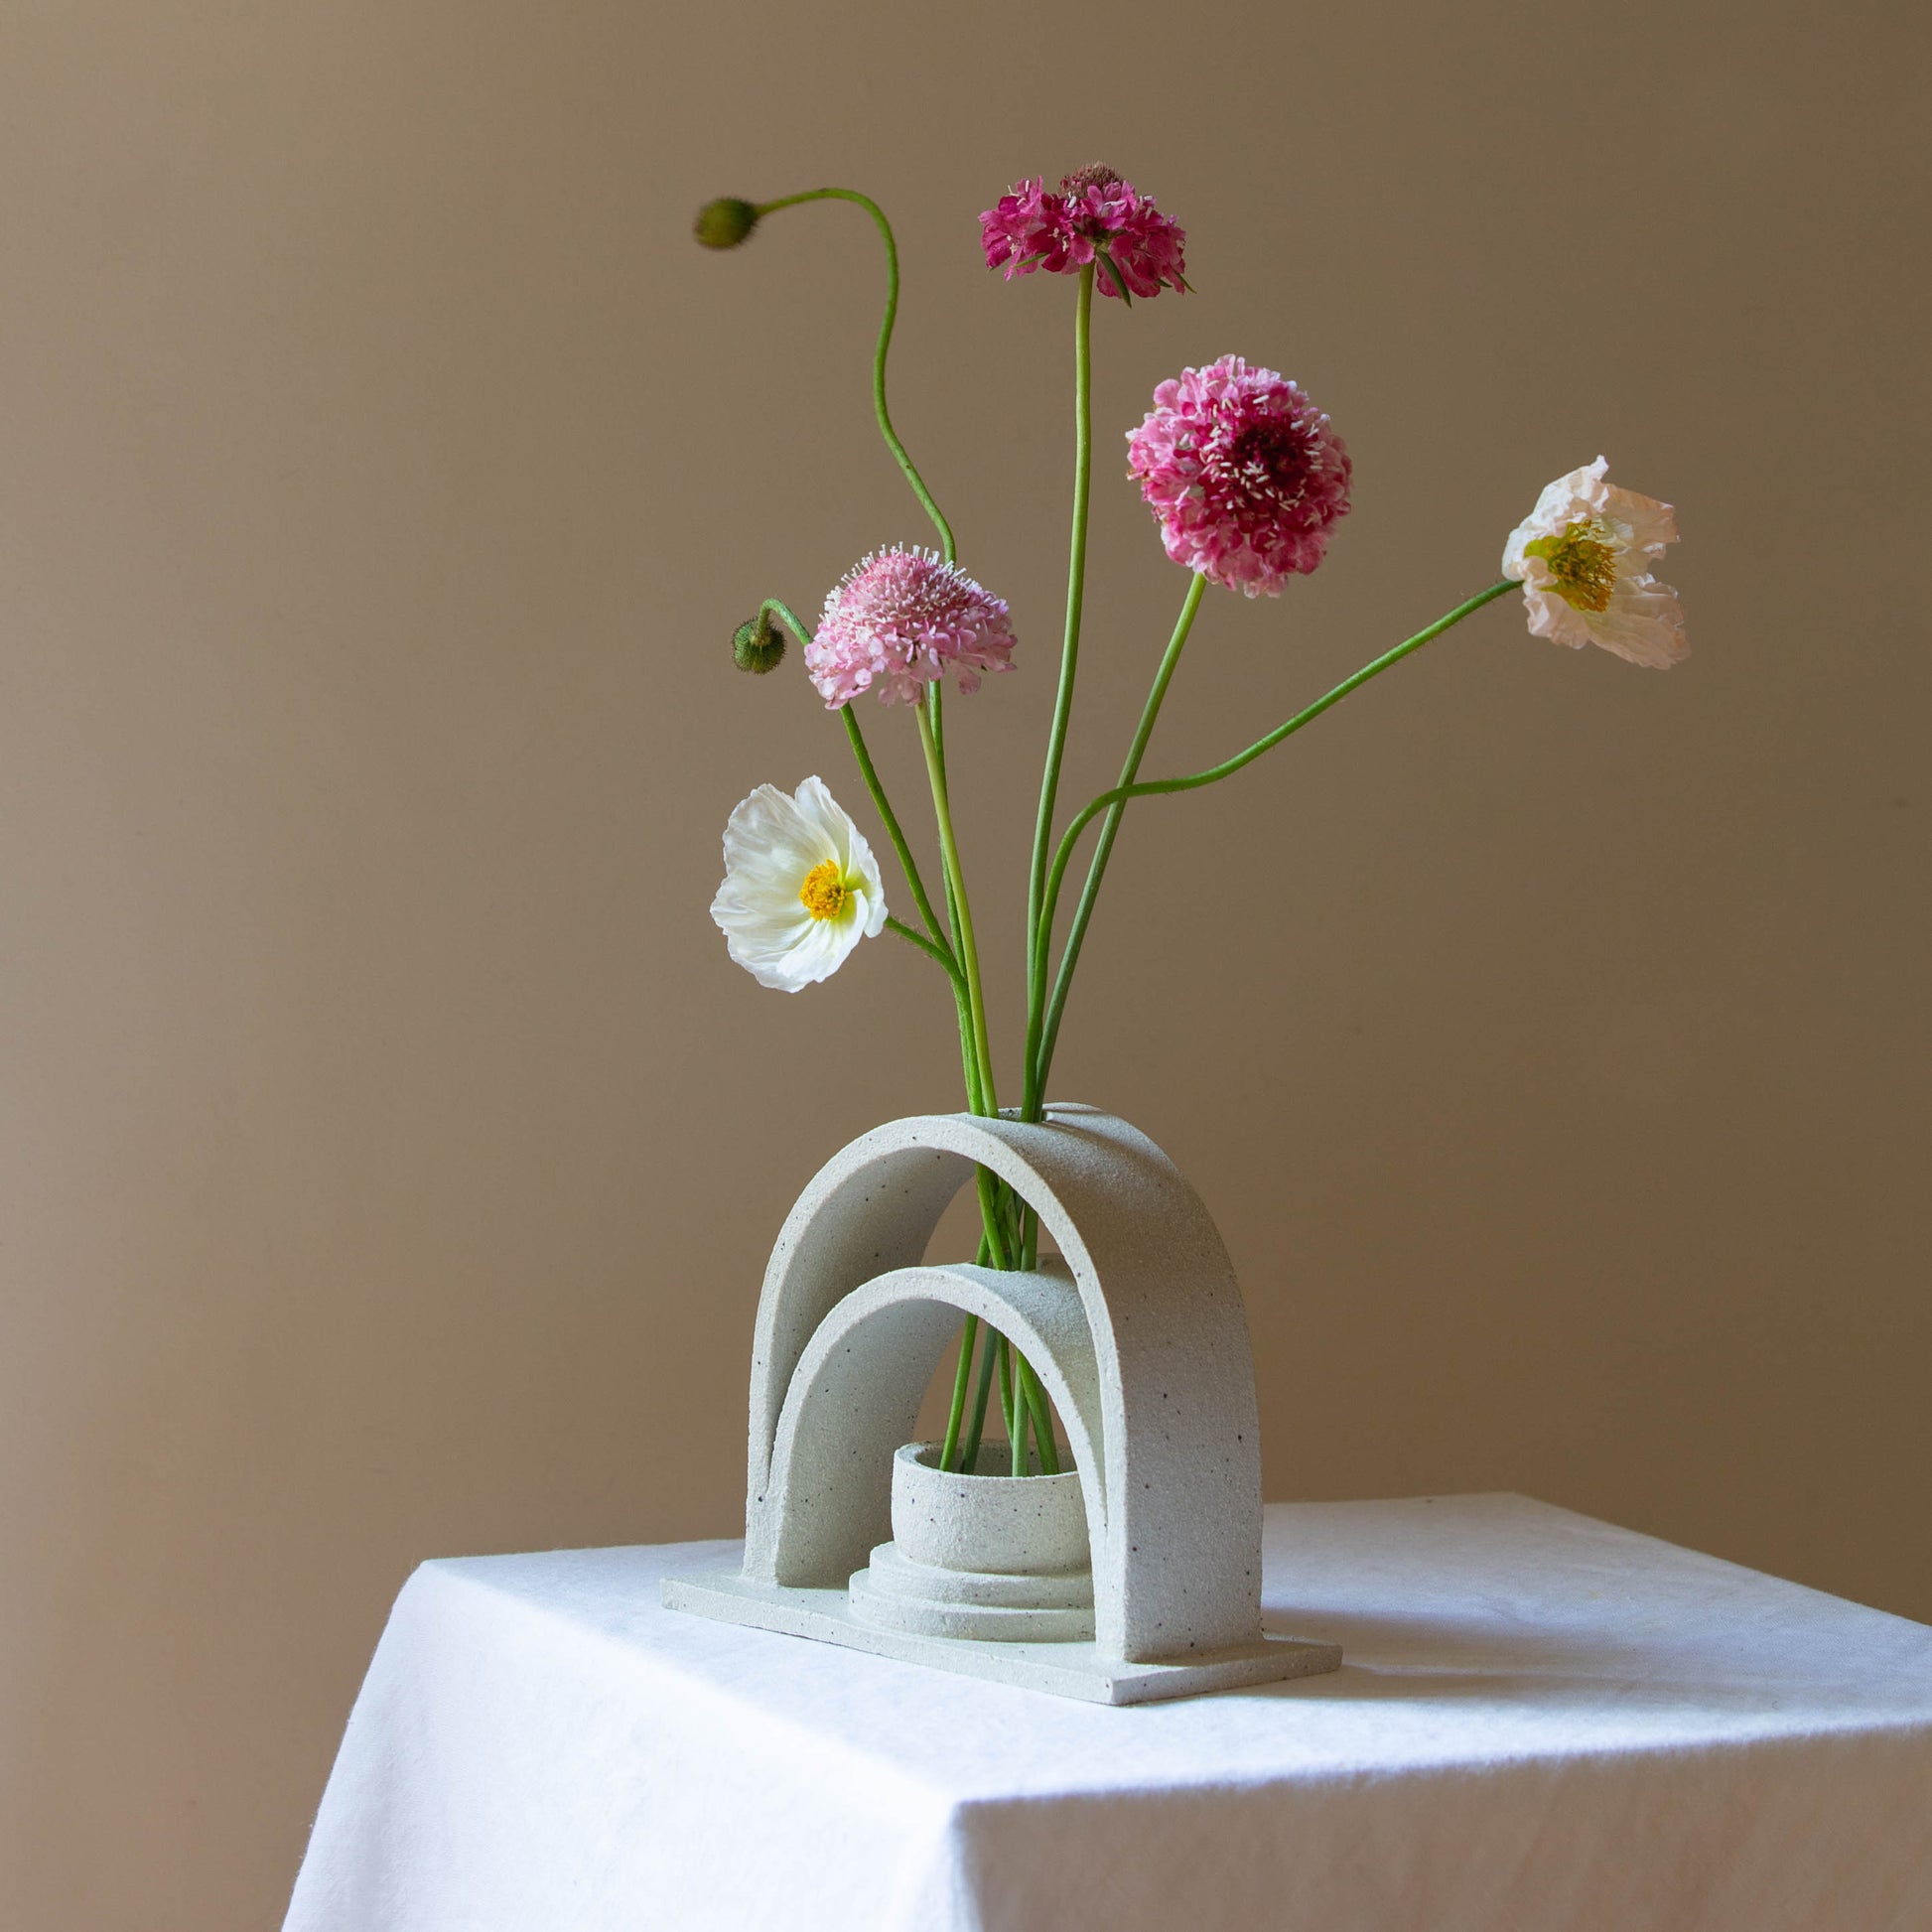 A handmade ceramic budvase sits on a white plinth. The budvase is in a sand colourway and has been left unglazed. The budvase holds a collection of pink, white and peach coloured flowers and unopened poppies.